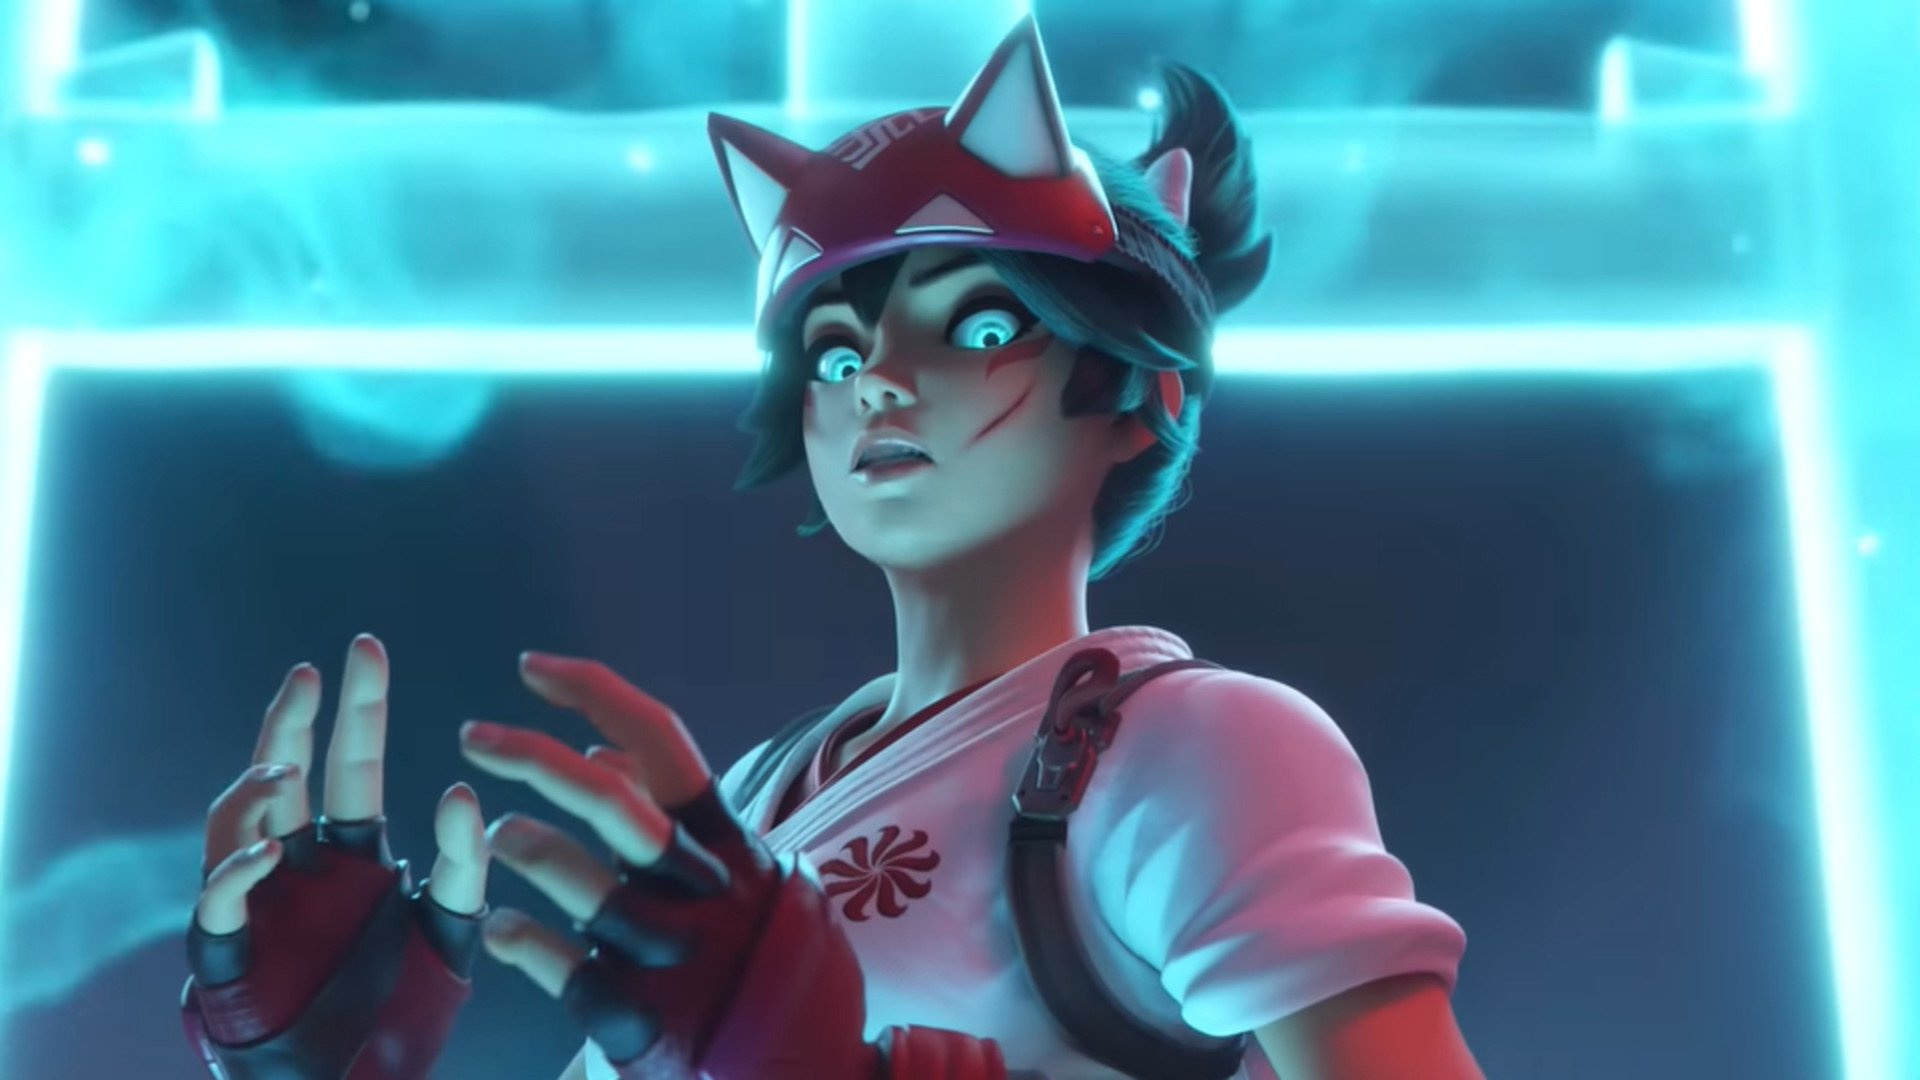 Overwatch 2 Kiriko animated short shows two very different sides to the new hero